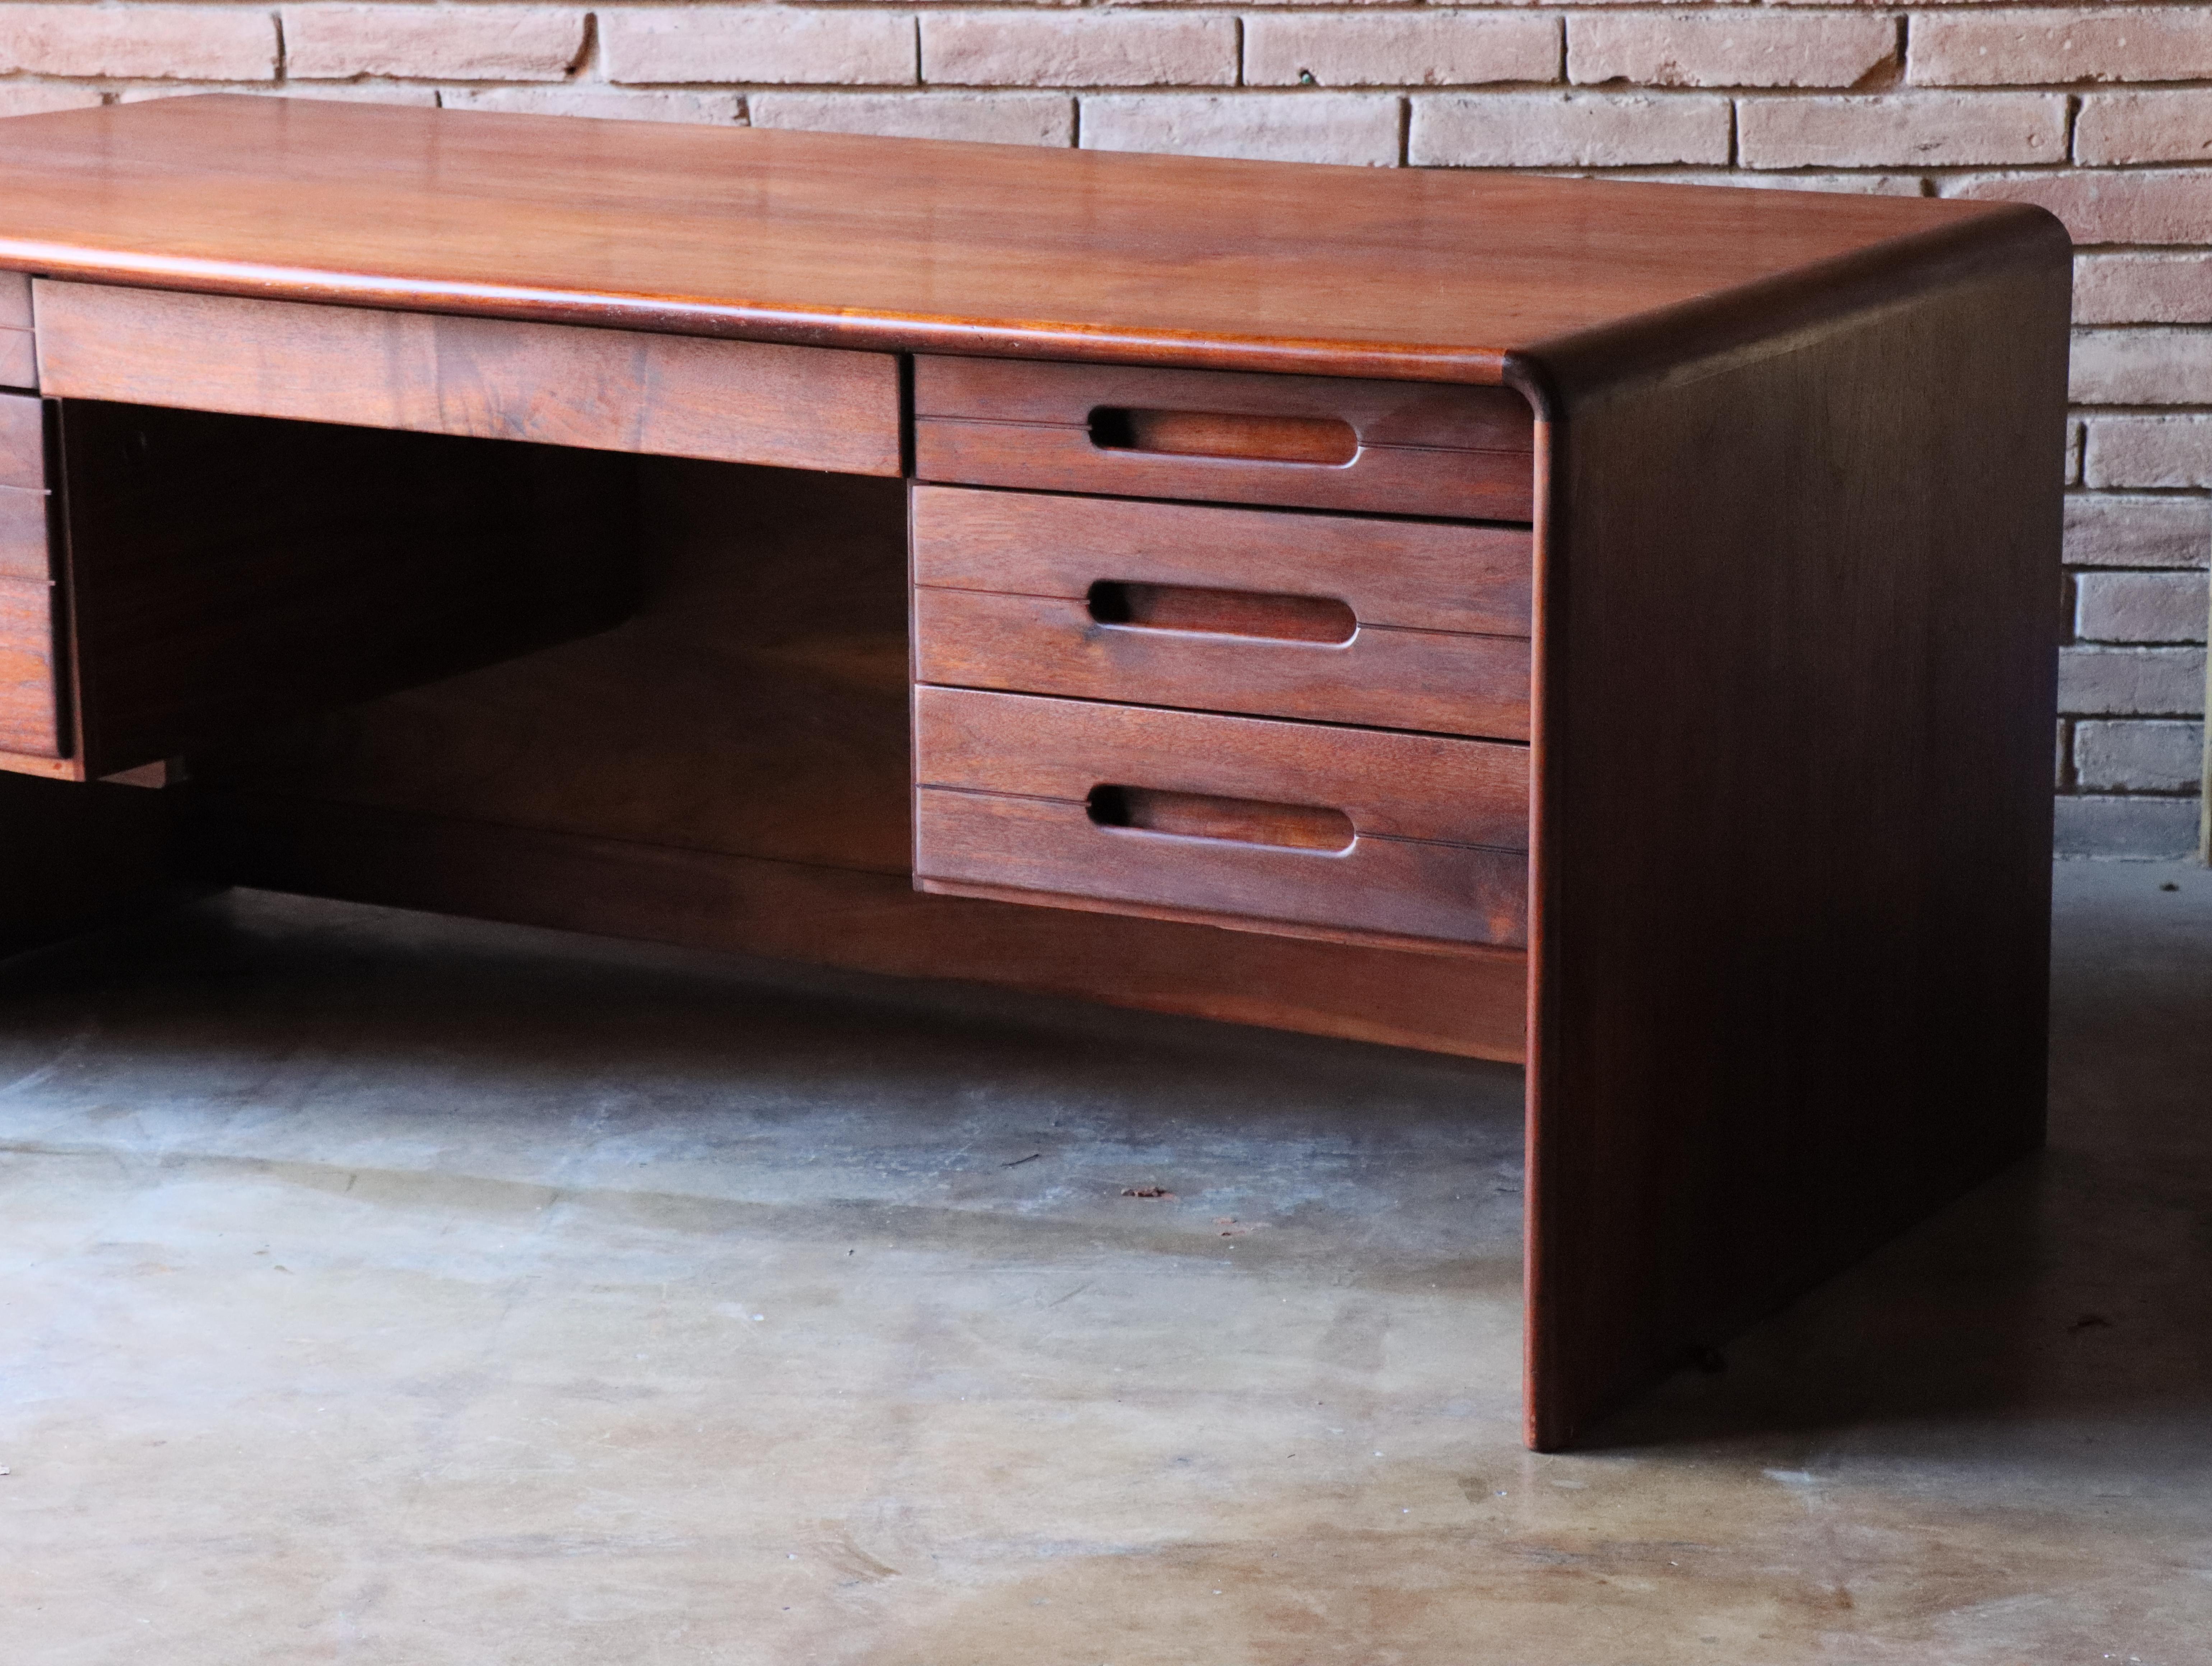 Late 20th Century Solid Walnut and Burlwood Desk by Lou Hodges, California Design, 1970s For Sale